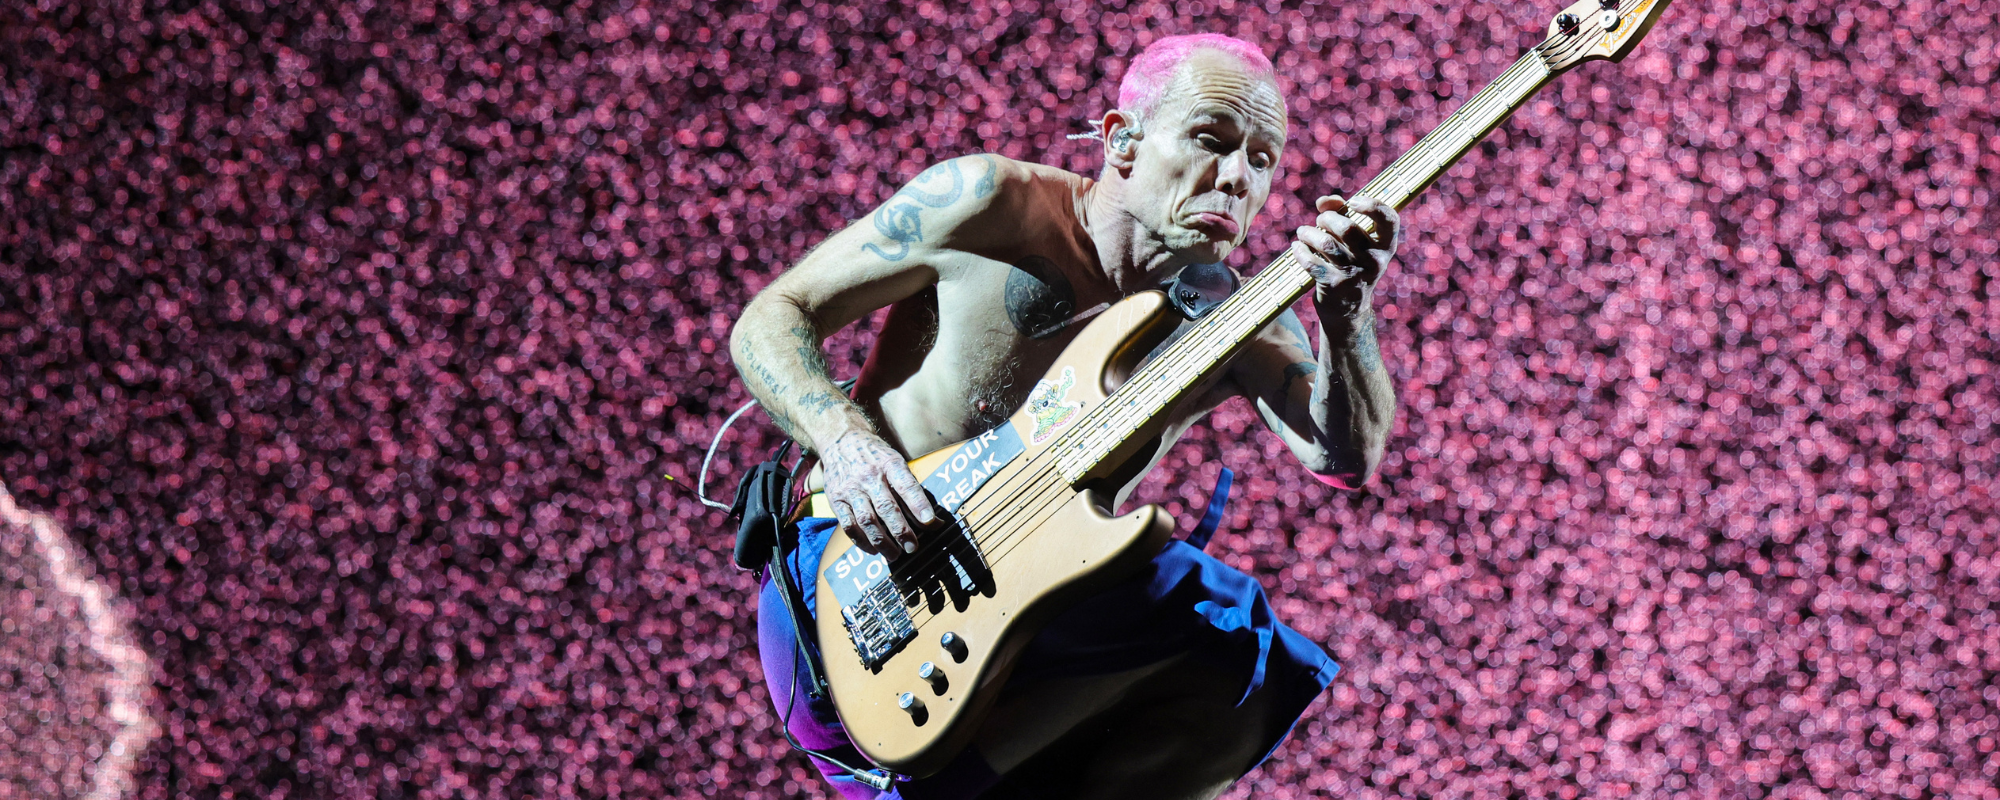 Honoring the National Treasure That Is Flea by Celebrating His 5 Most Absurdly Stellar Bass Lines